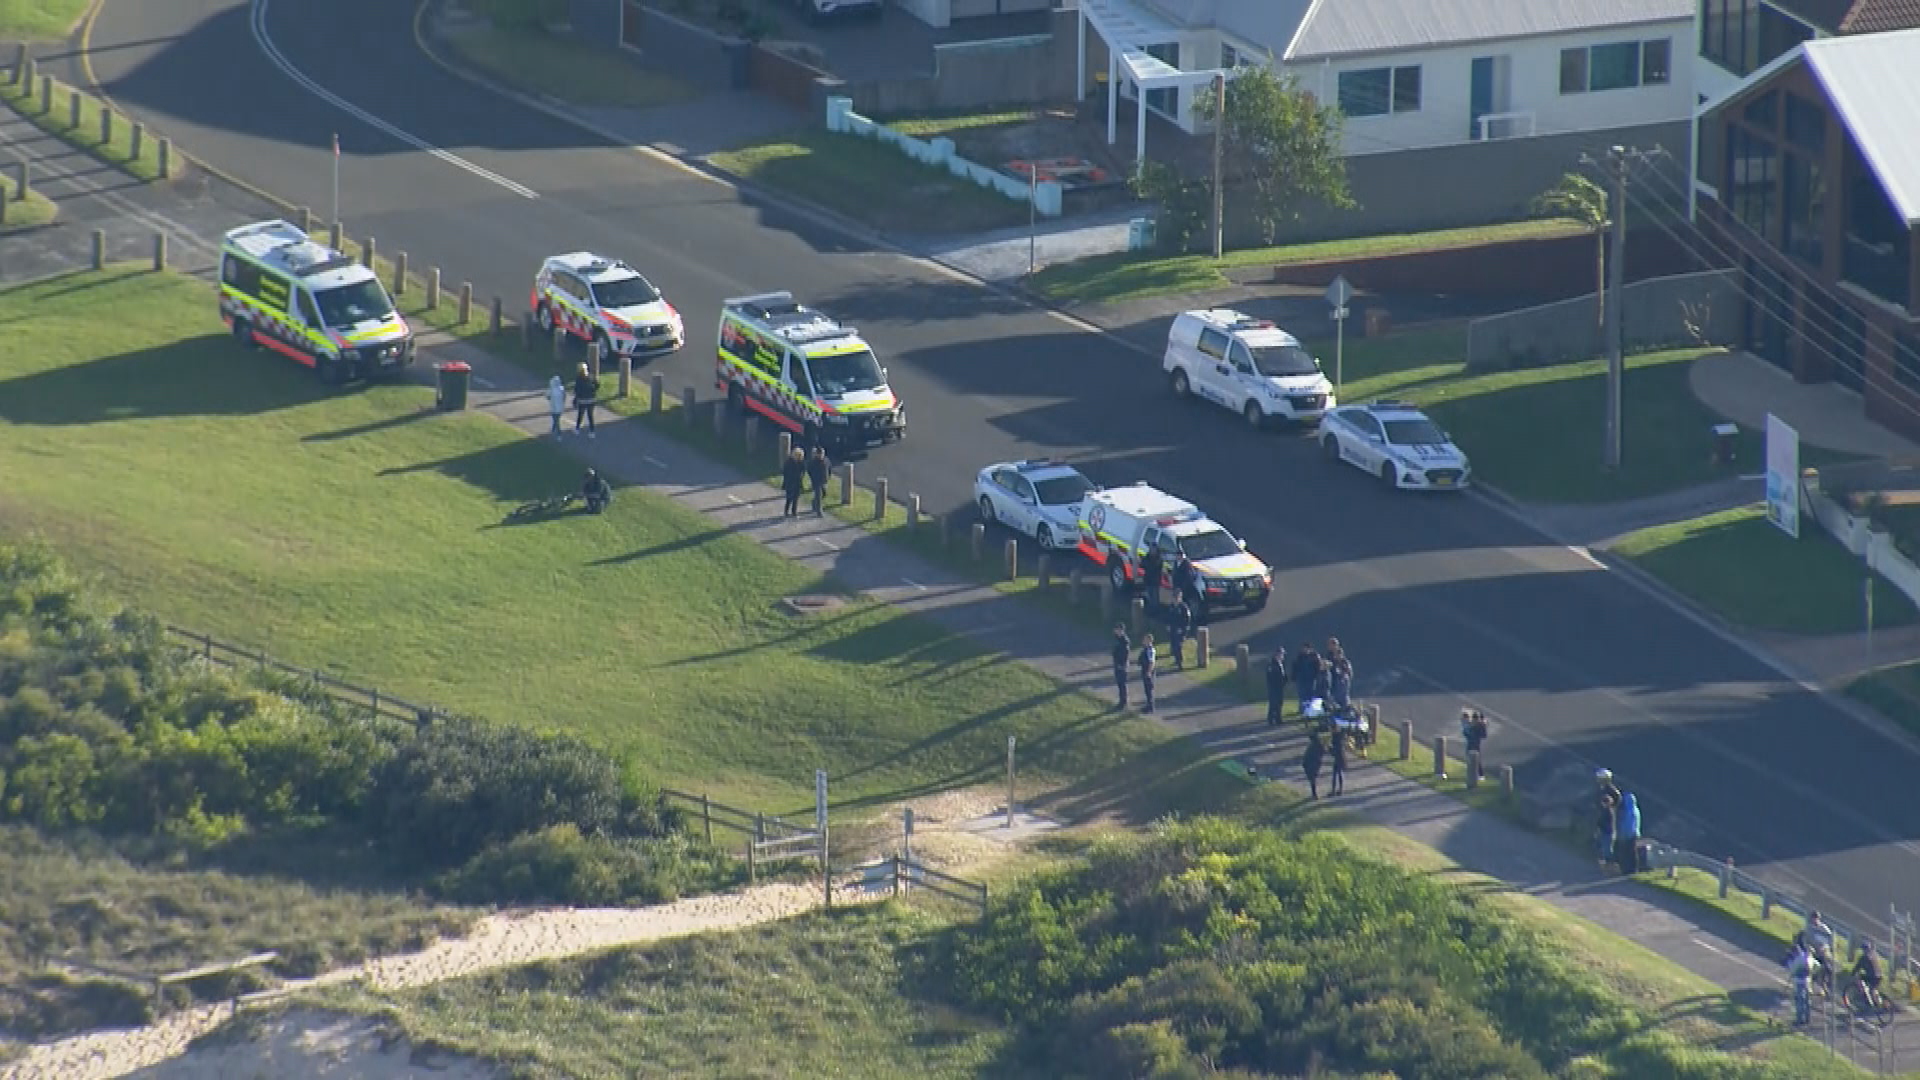 Search operation underway at a Wollongong beach after a paraglider reportedly crashed.